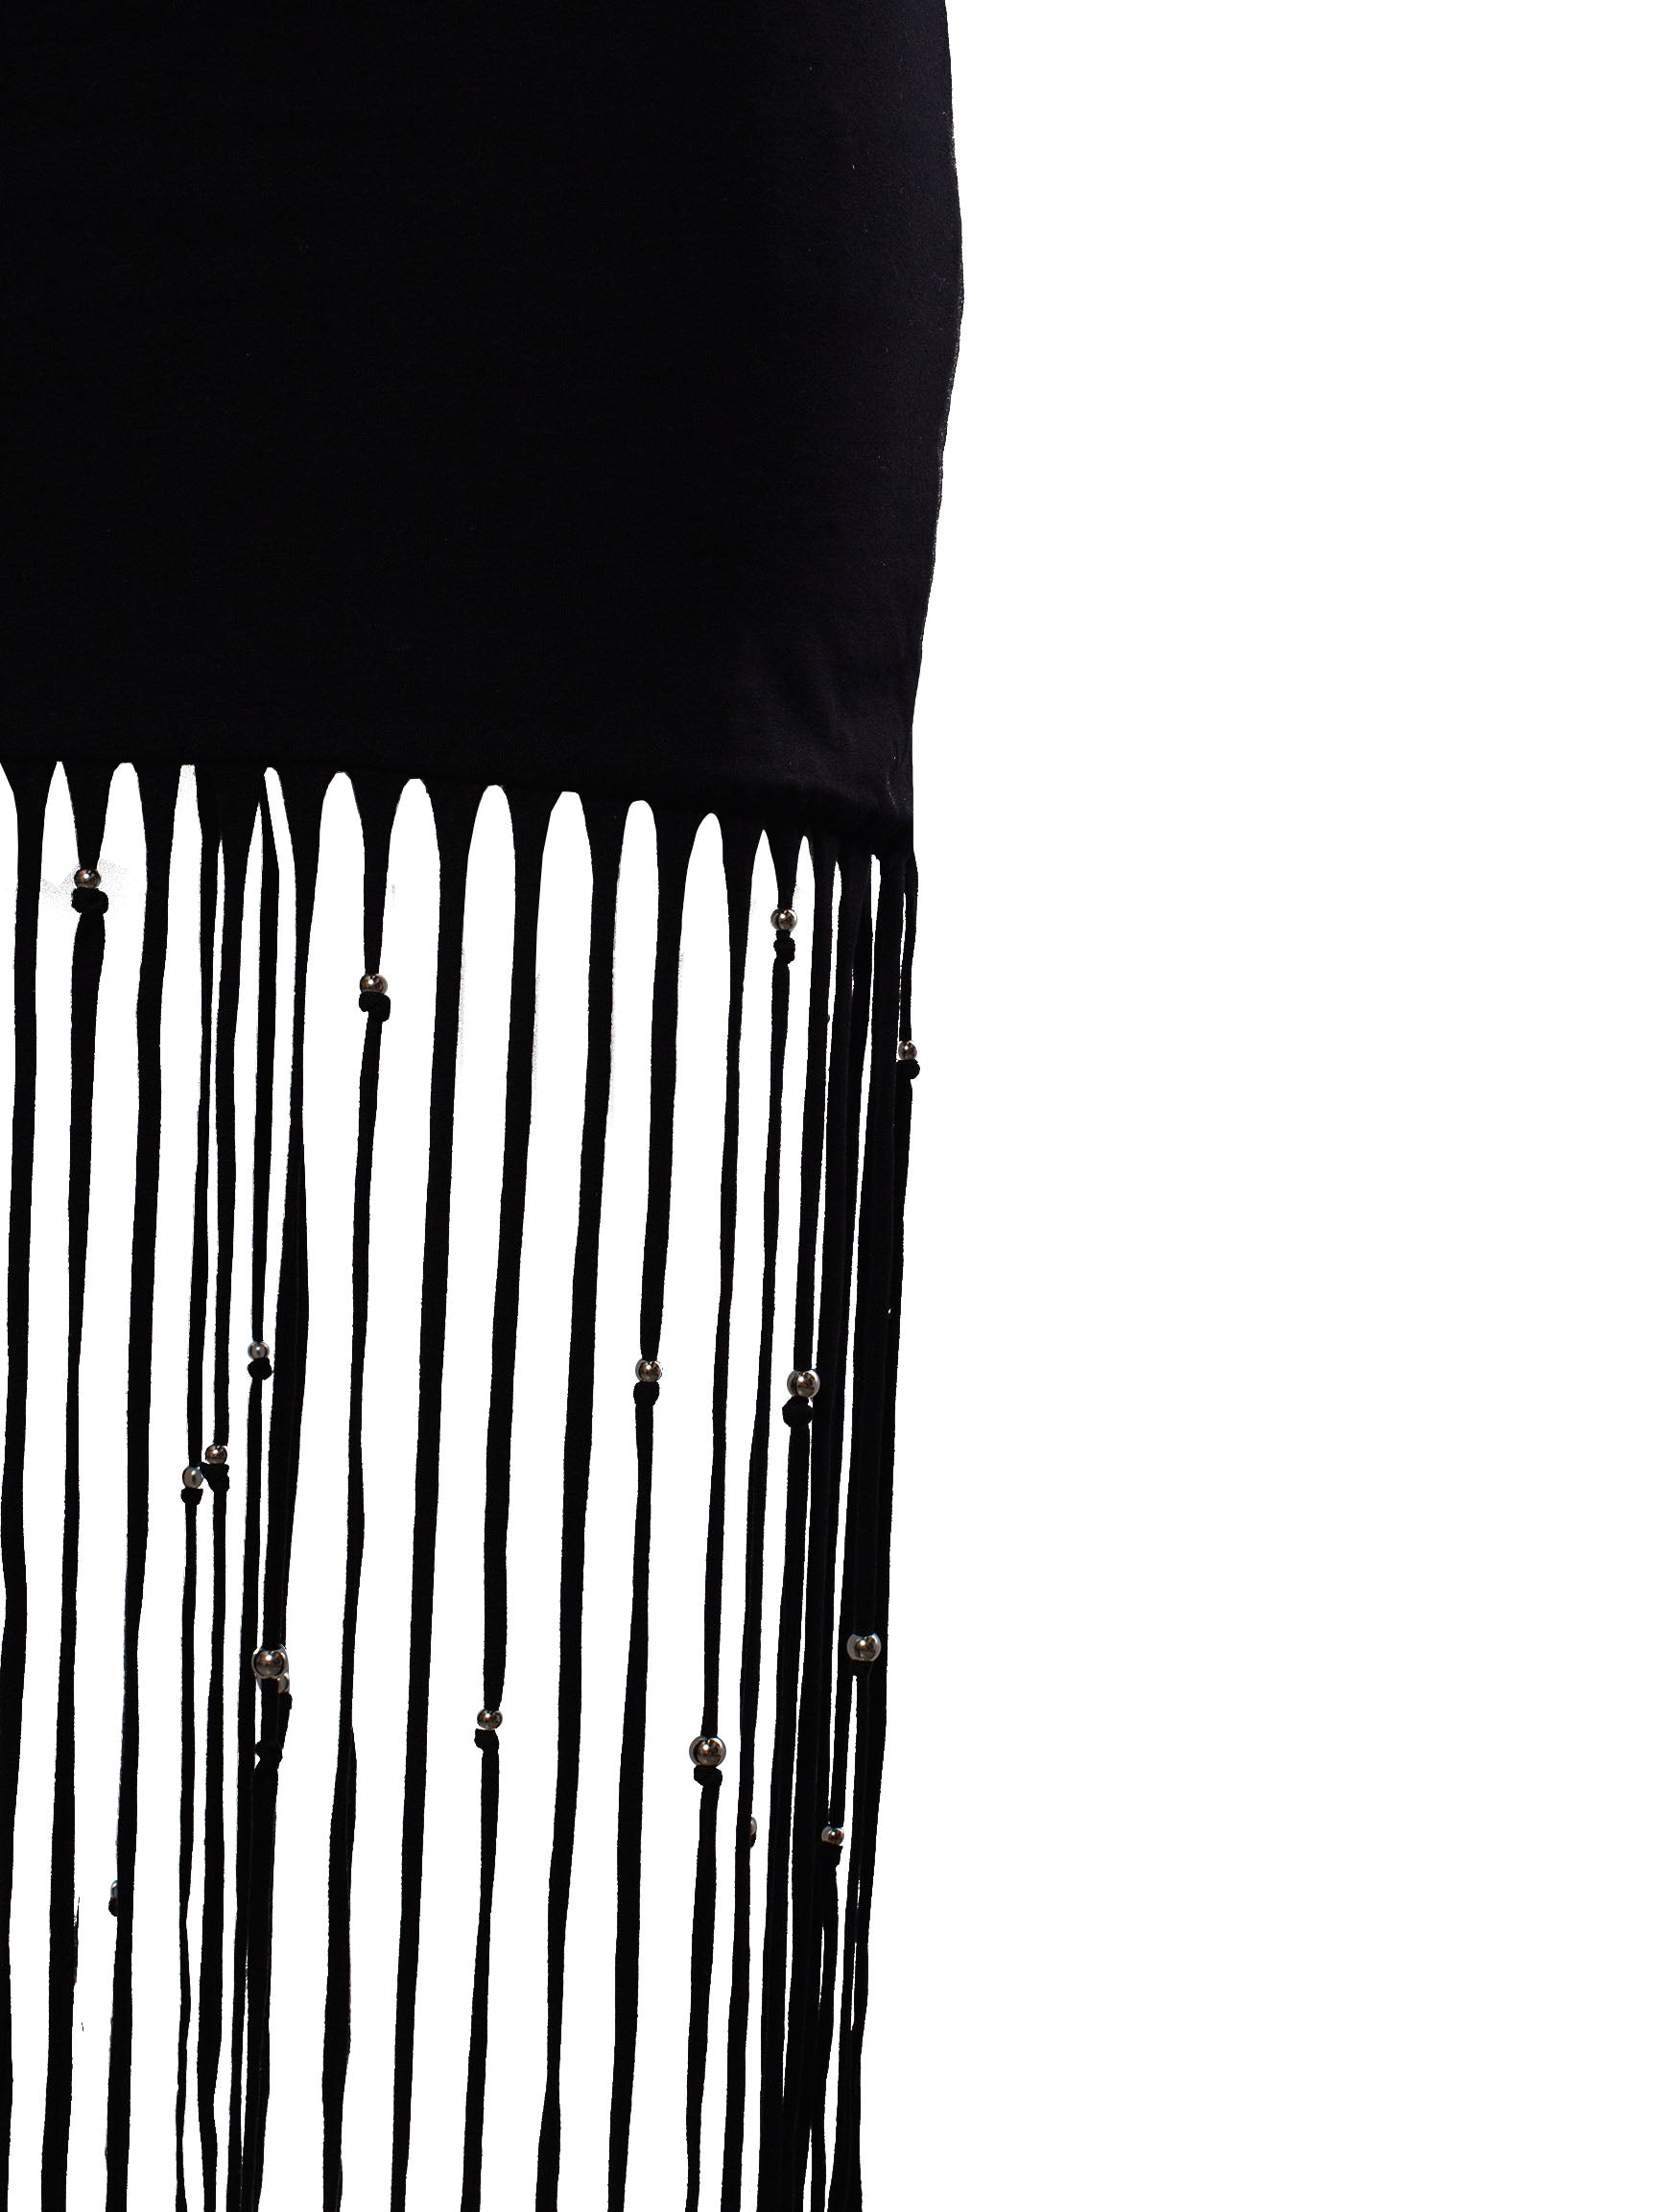 ROTATE FRINGED JERSEY MAXI SKIRT